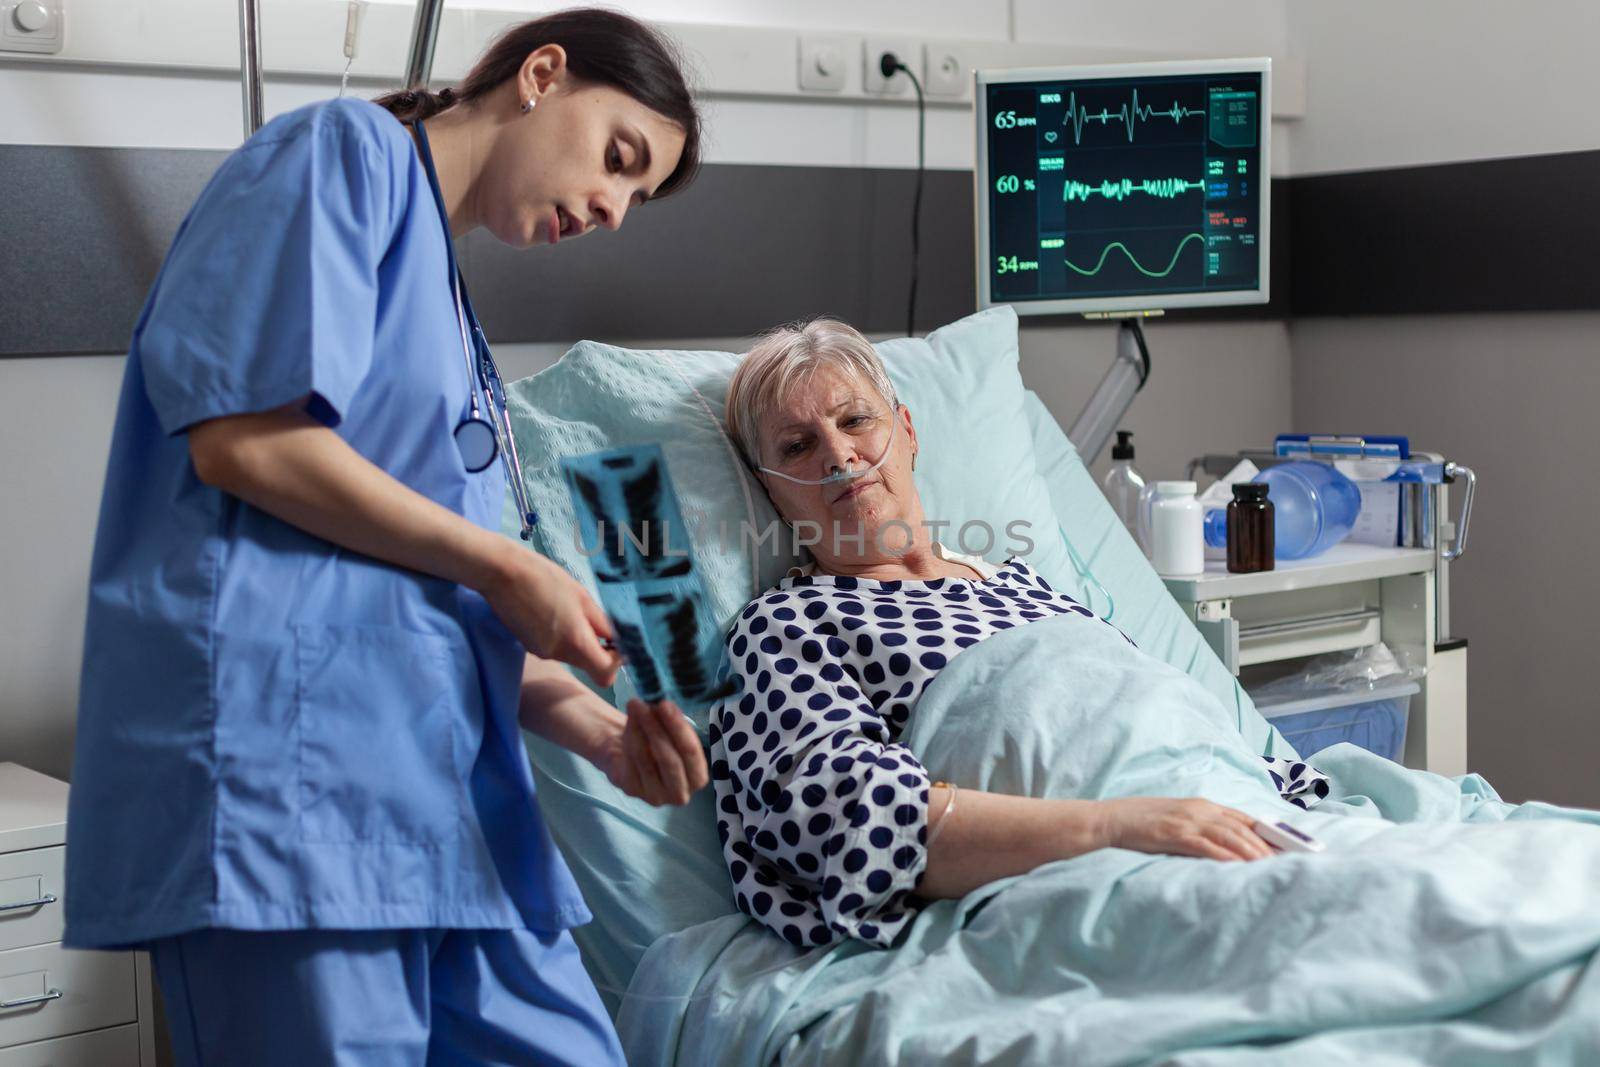 Old patient with lungs illness breathing using oxygen mask laying in hospital bed, listening nurse showing x-ray explayning diagnosis before surgery. Getting treatment through intravenous line.